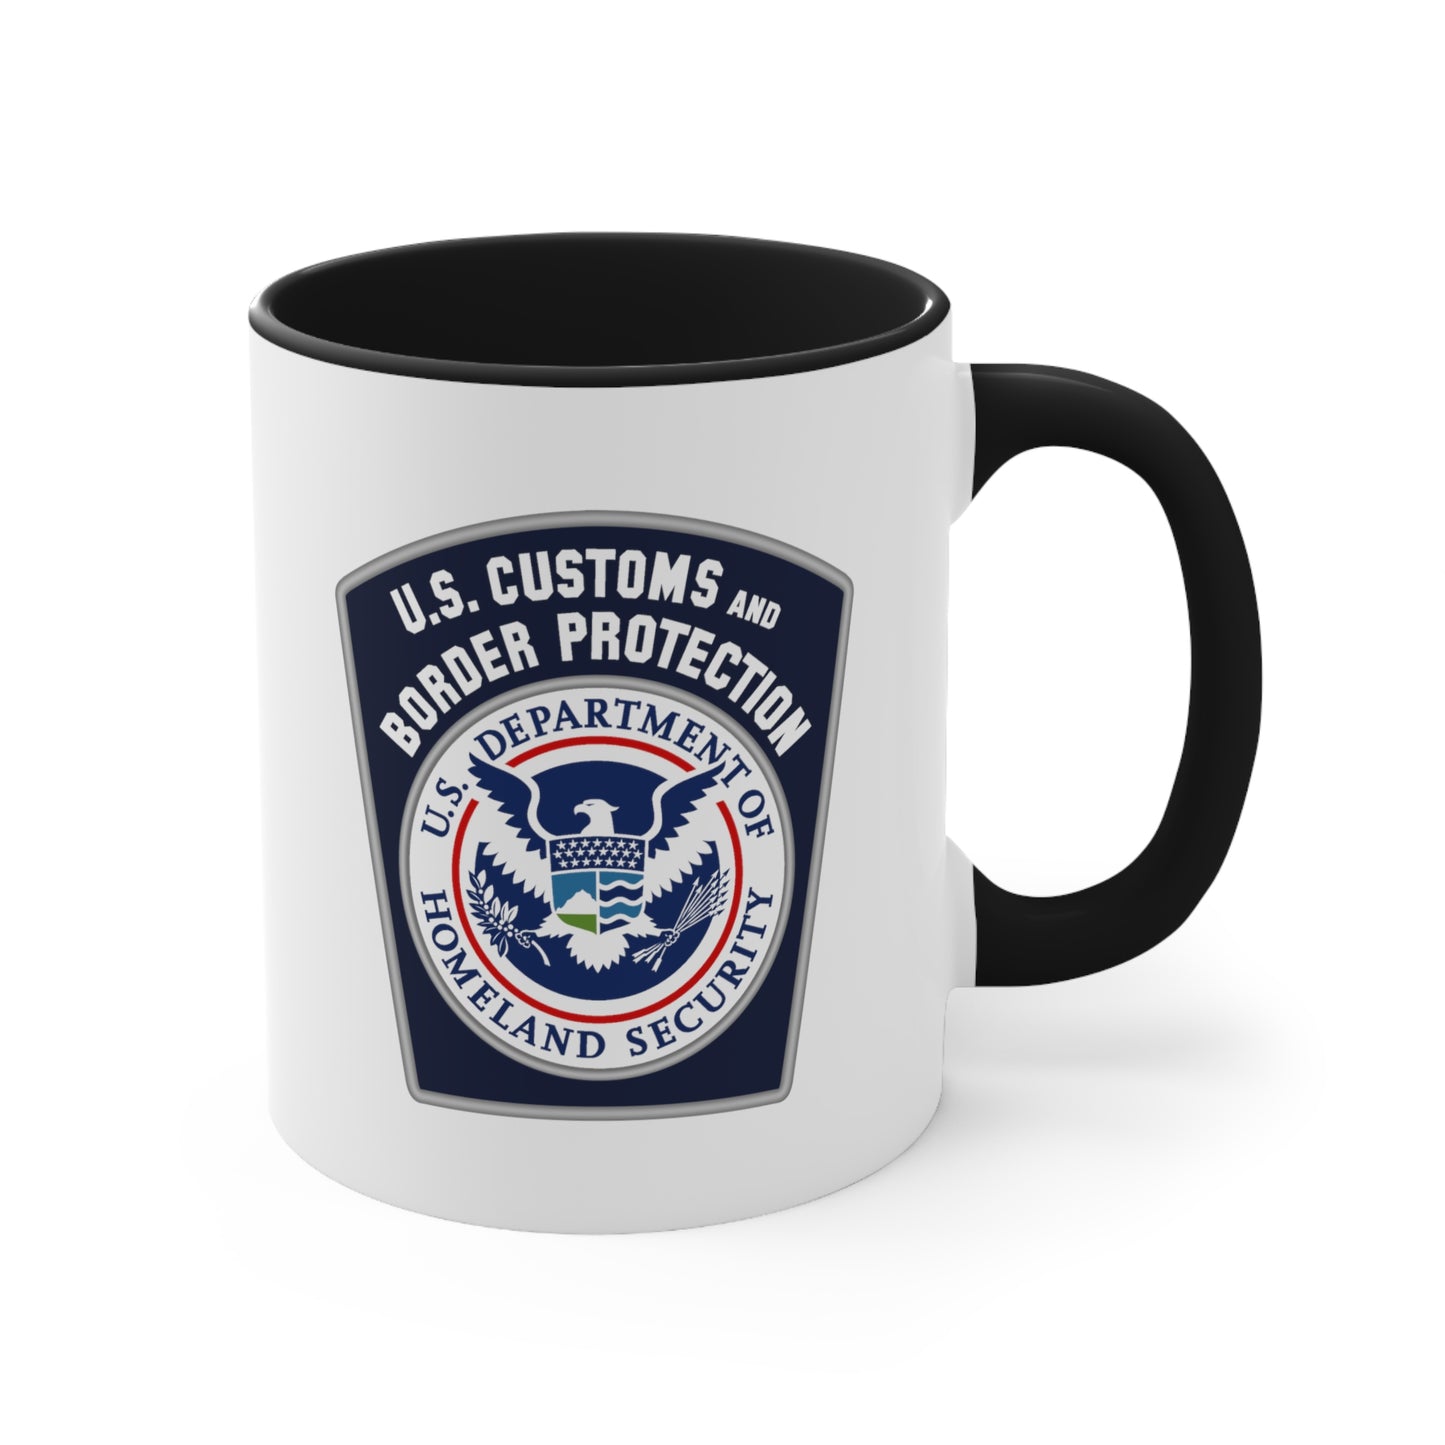 US Customs and Border Protection Coffee Mug - Double Sided Black Accent White Ceramic 11oz by TheGlassyLass